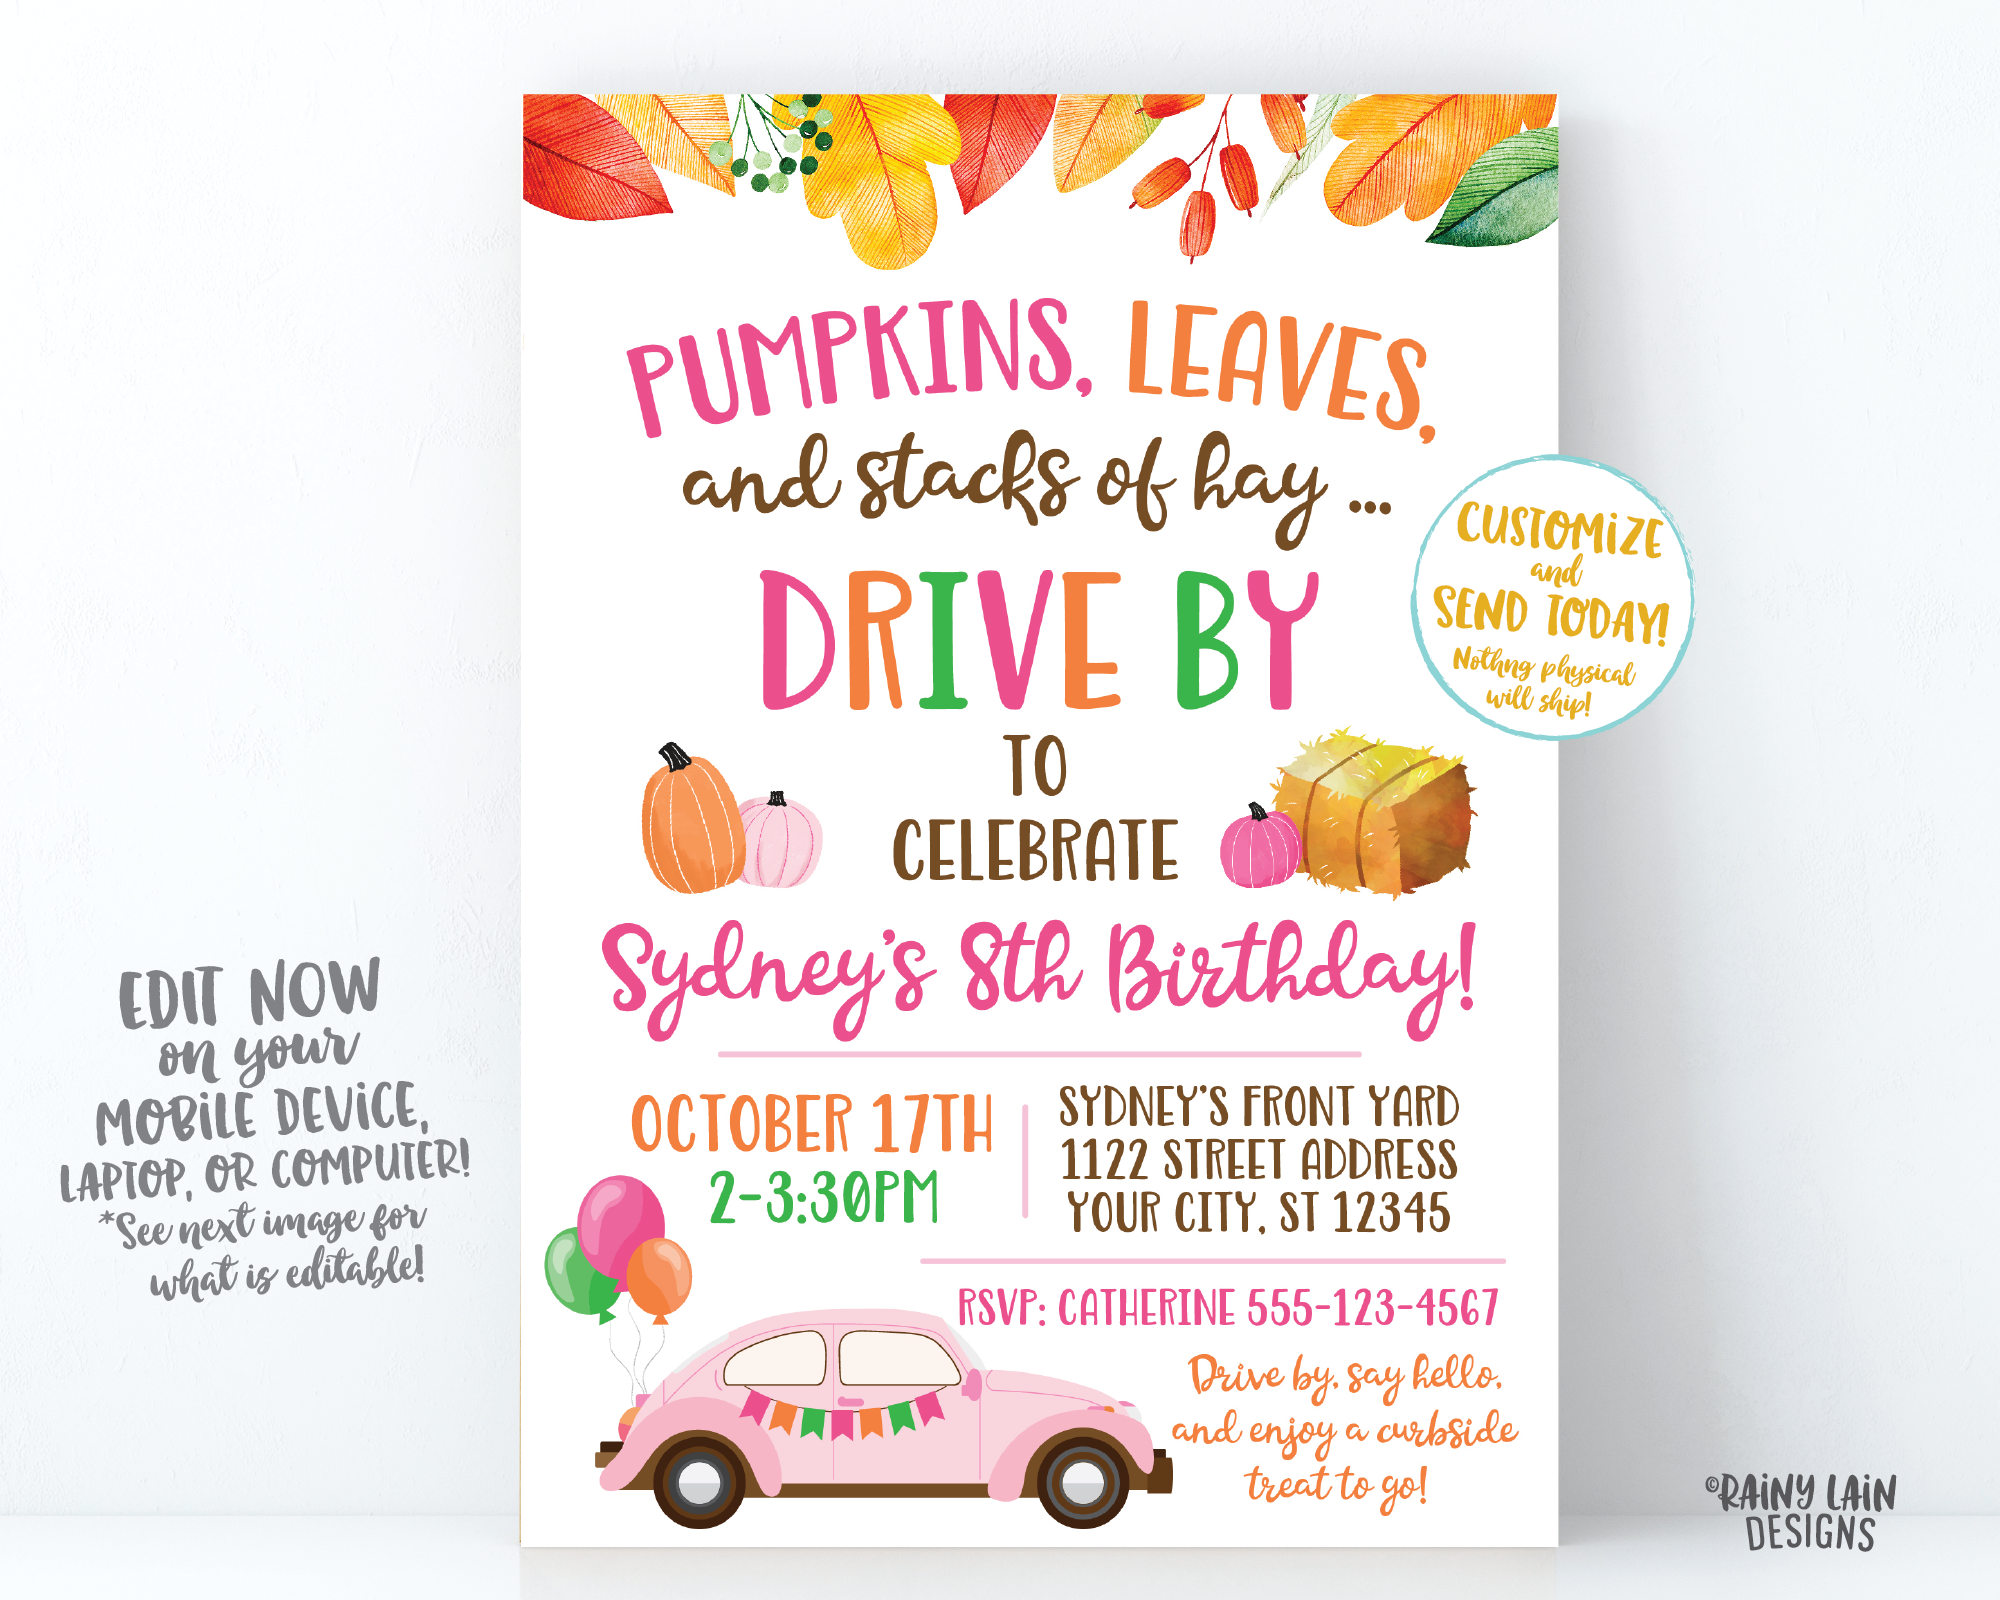 Fall Drive By Birthday Invitation Autumn Drive By Birthday Party Fall Leaves Autumn Leaves Drive Through Girl Pumpkins Leaves Stacks of Hay